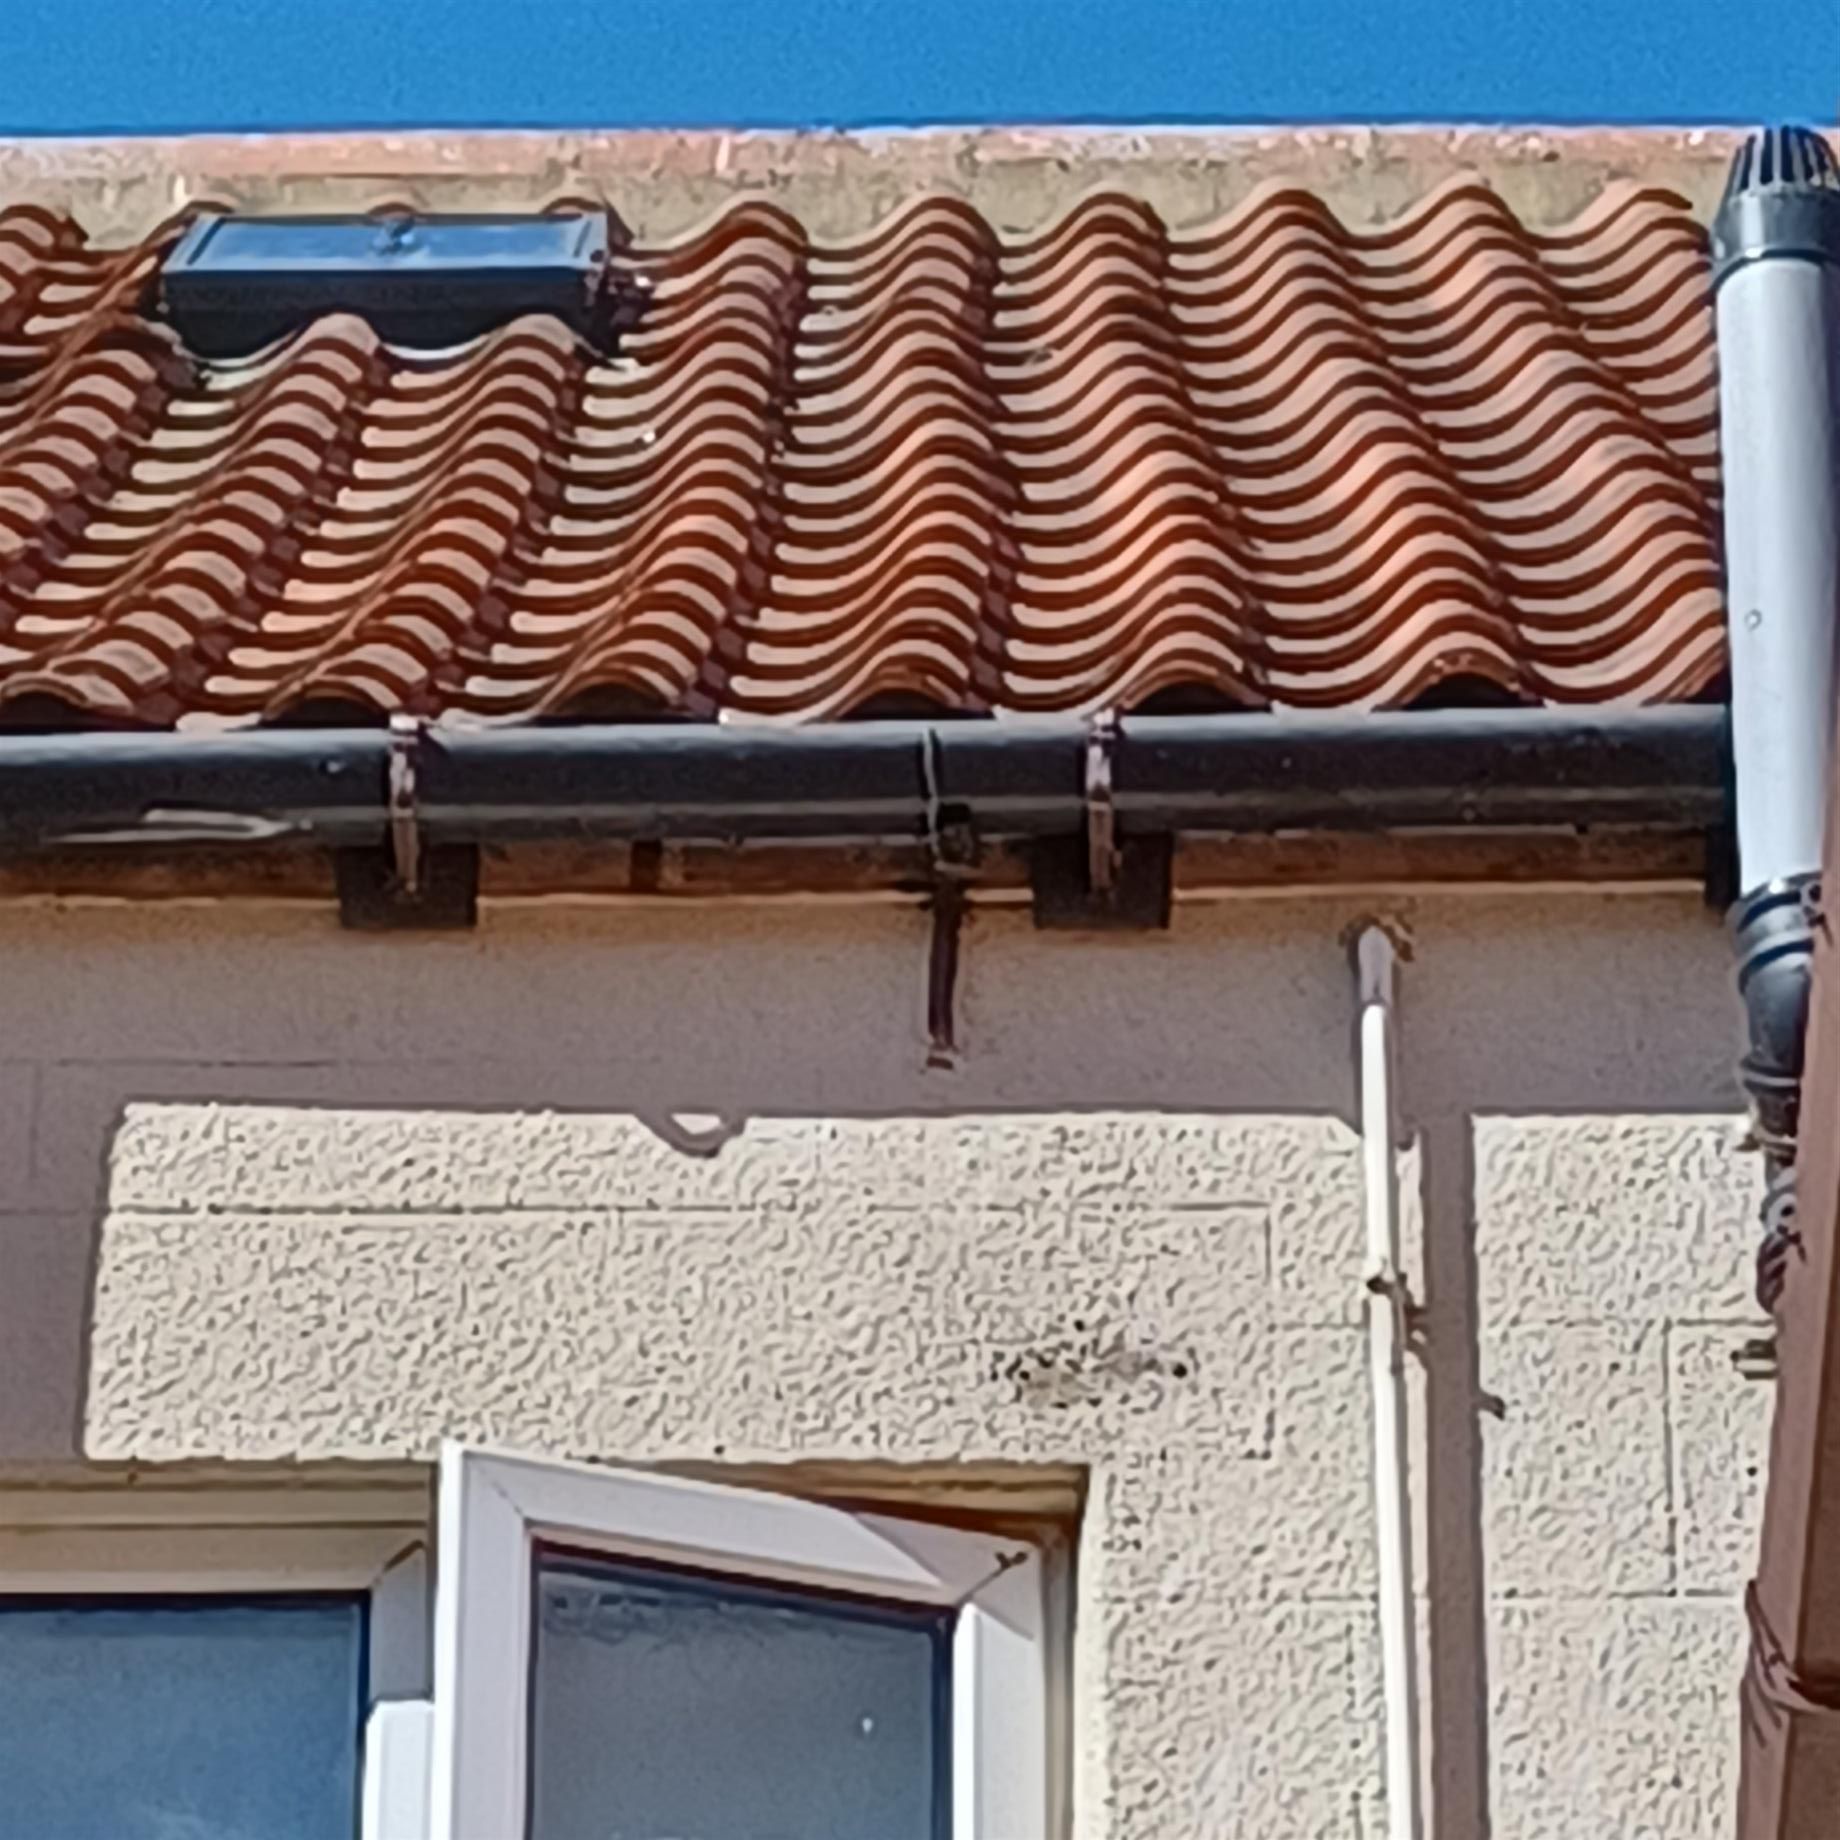 Misaligned roof tiles indicating Movement to the roof structure. 